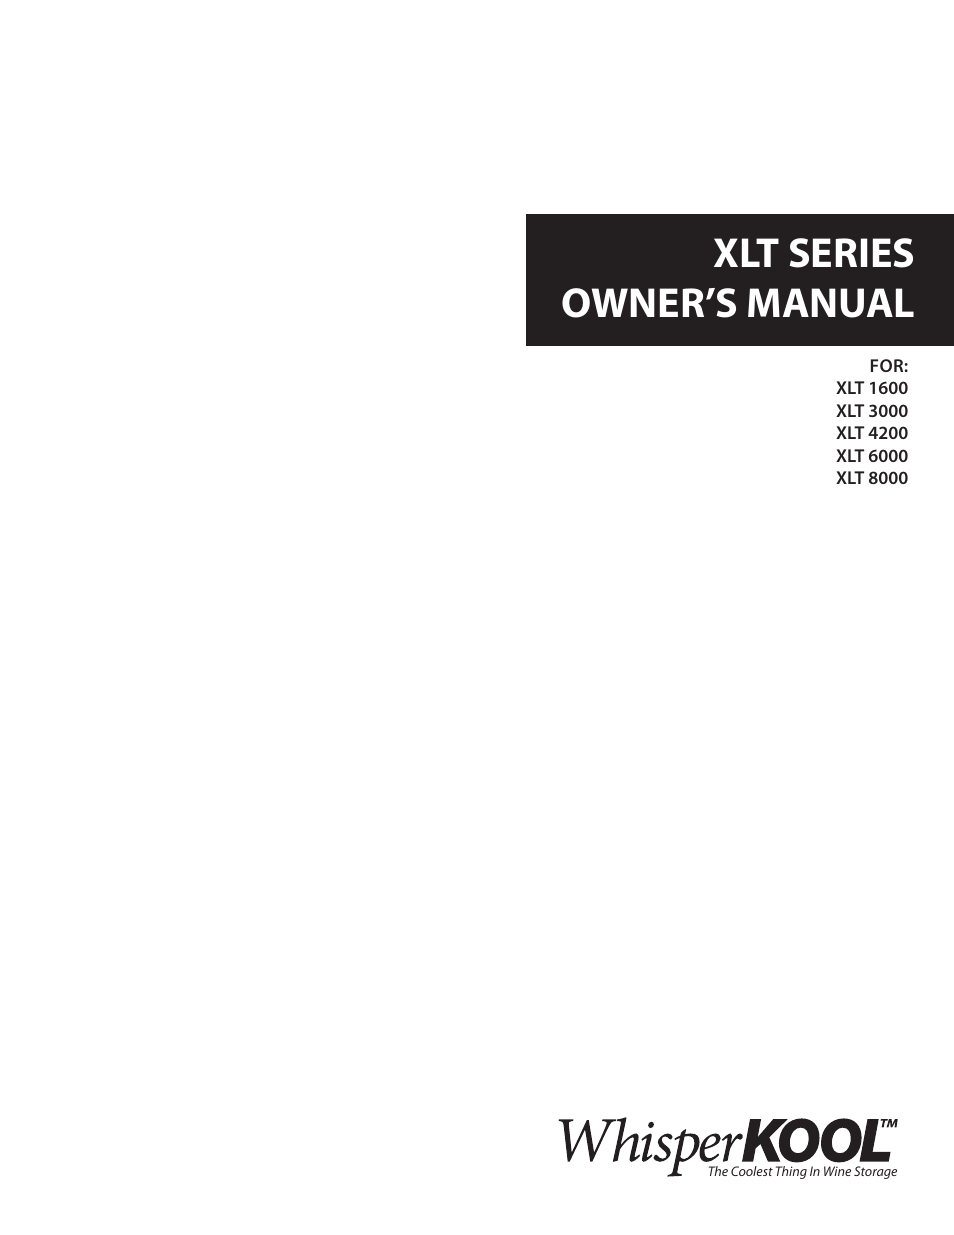 WhisperKool XLT SERIES XLT 6000 User Manual | 36 pages